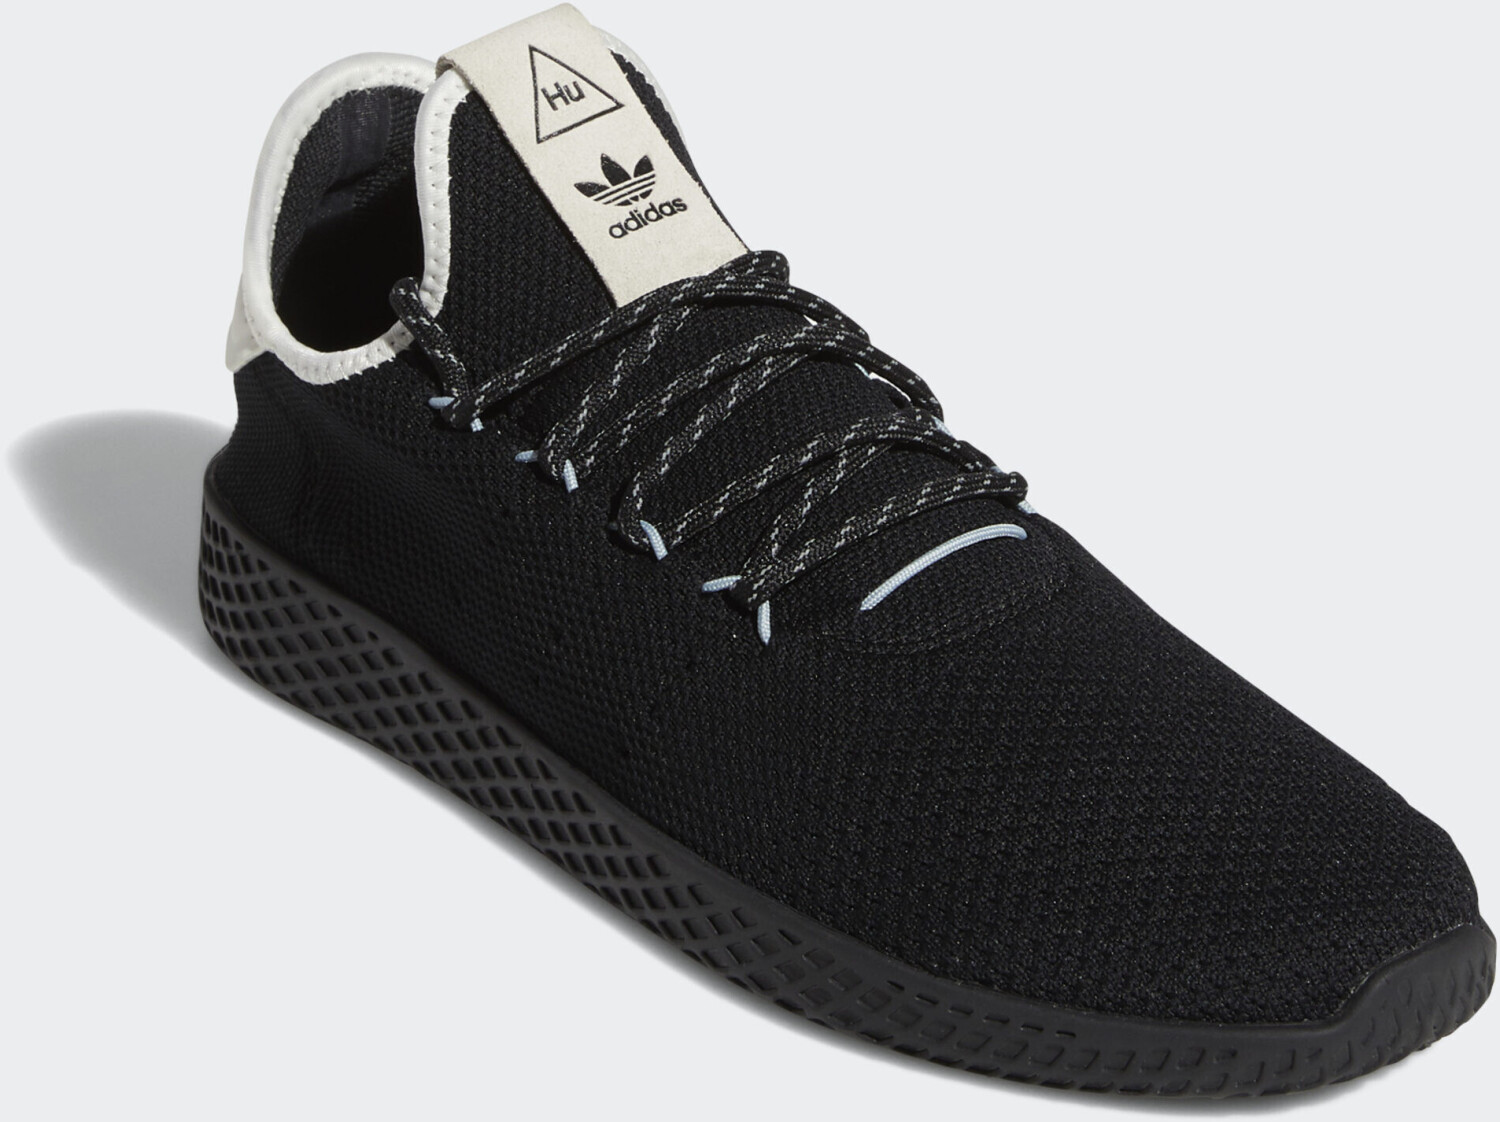 adidas Mens Pharrell Williams Tennis Hu Shoes in Black and White